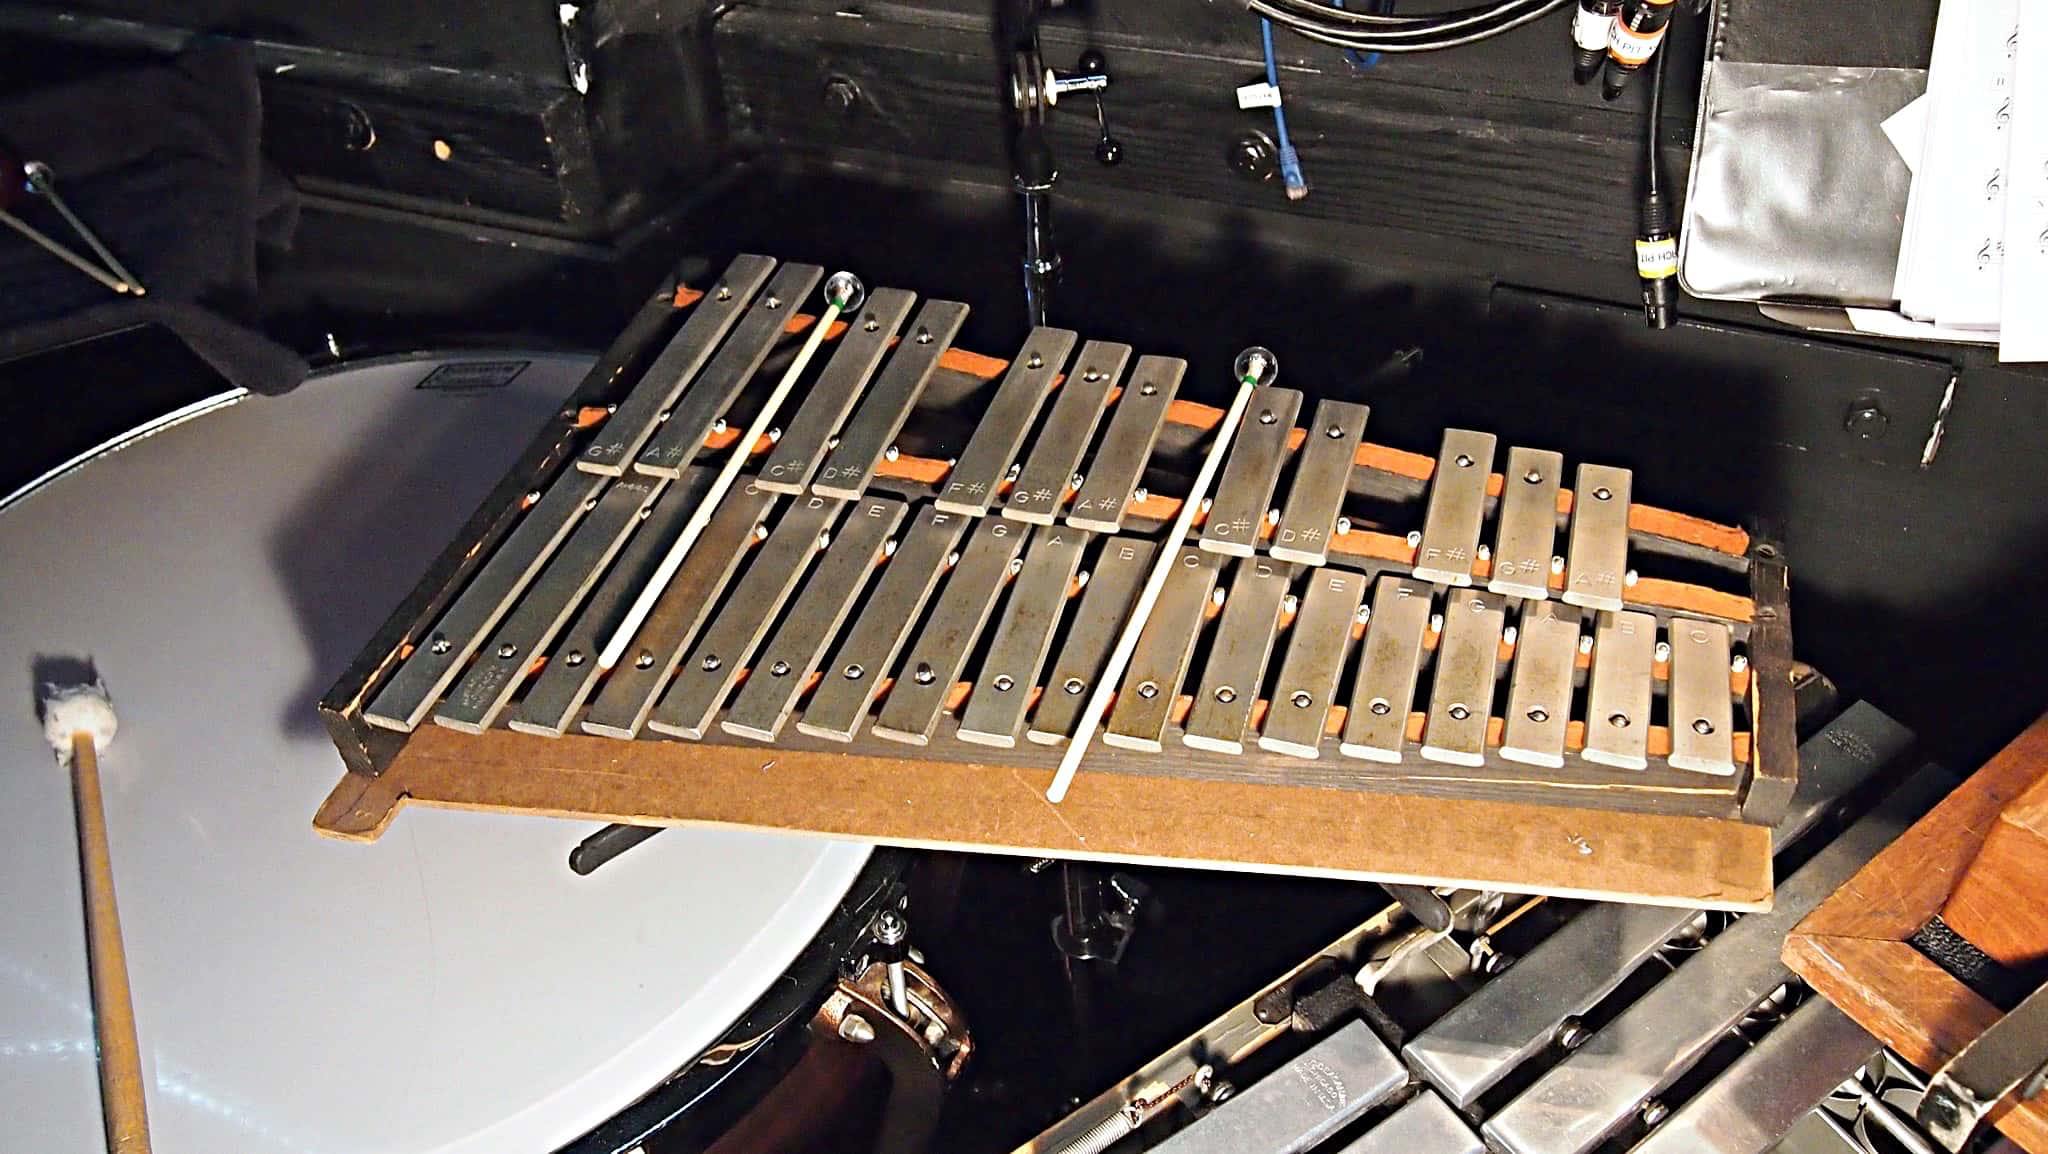 Paul Hansen’s percussion setup for How to Succeed in Business Without Really Trying at the 5th Avenue Theatre in Seattle, Washington.